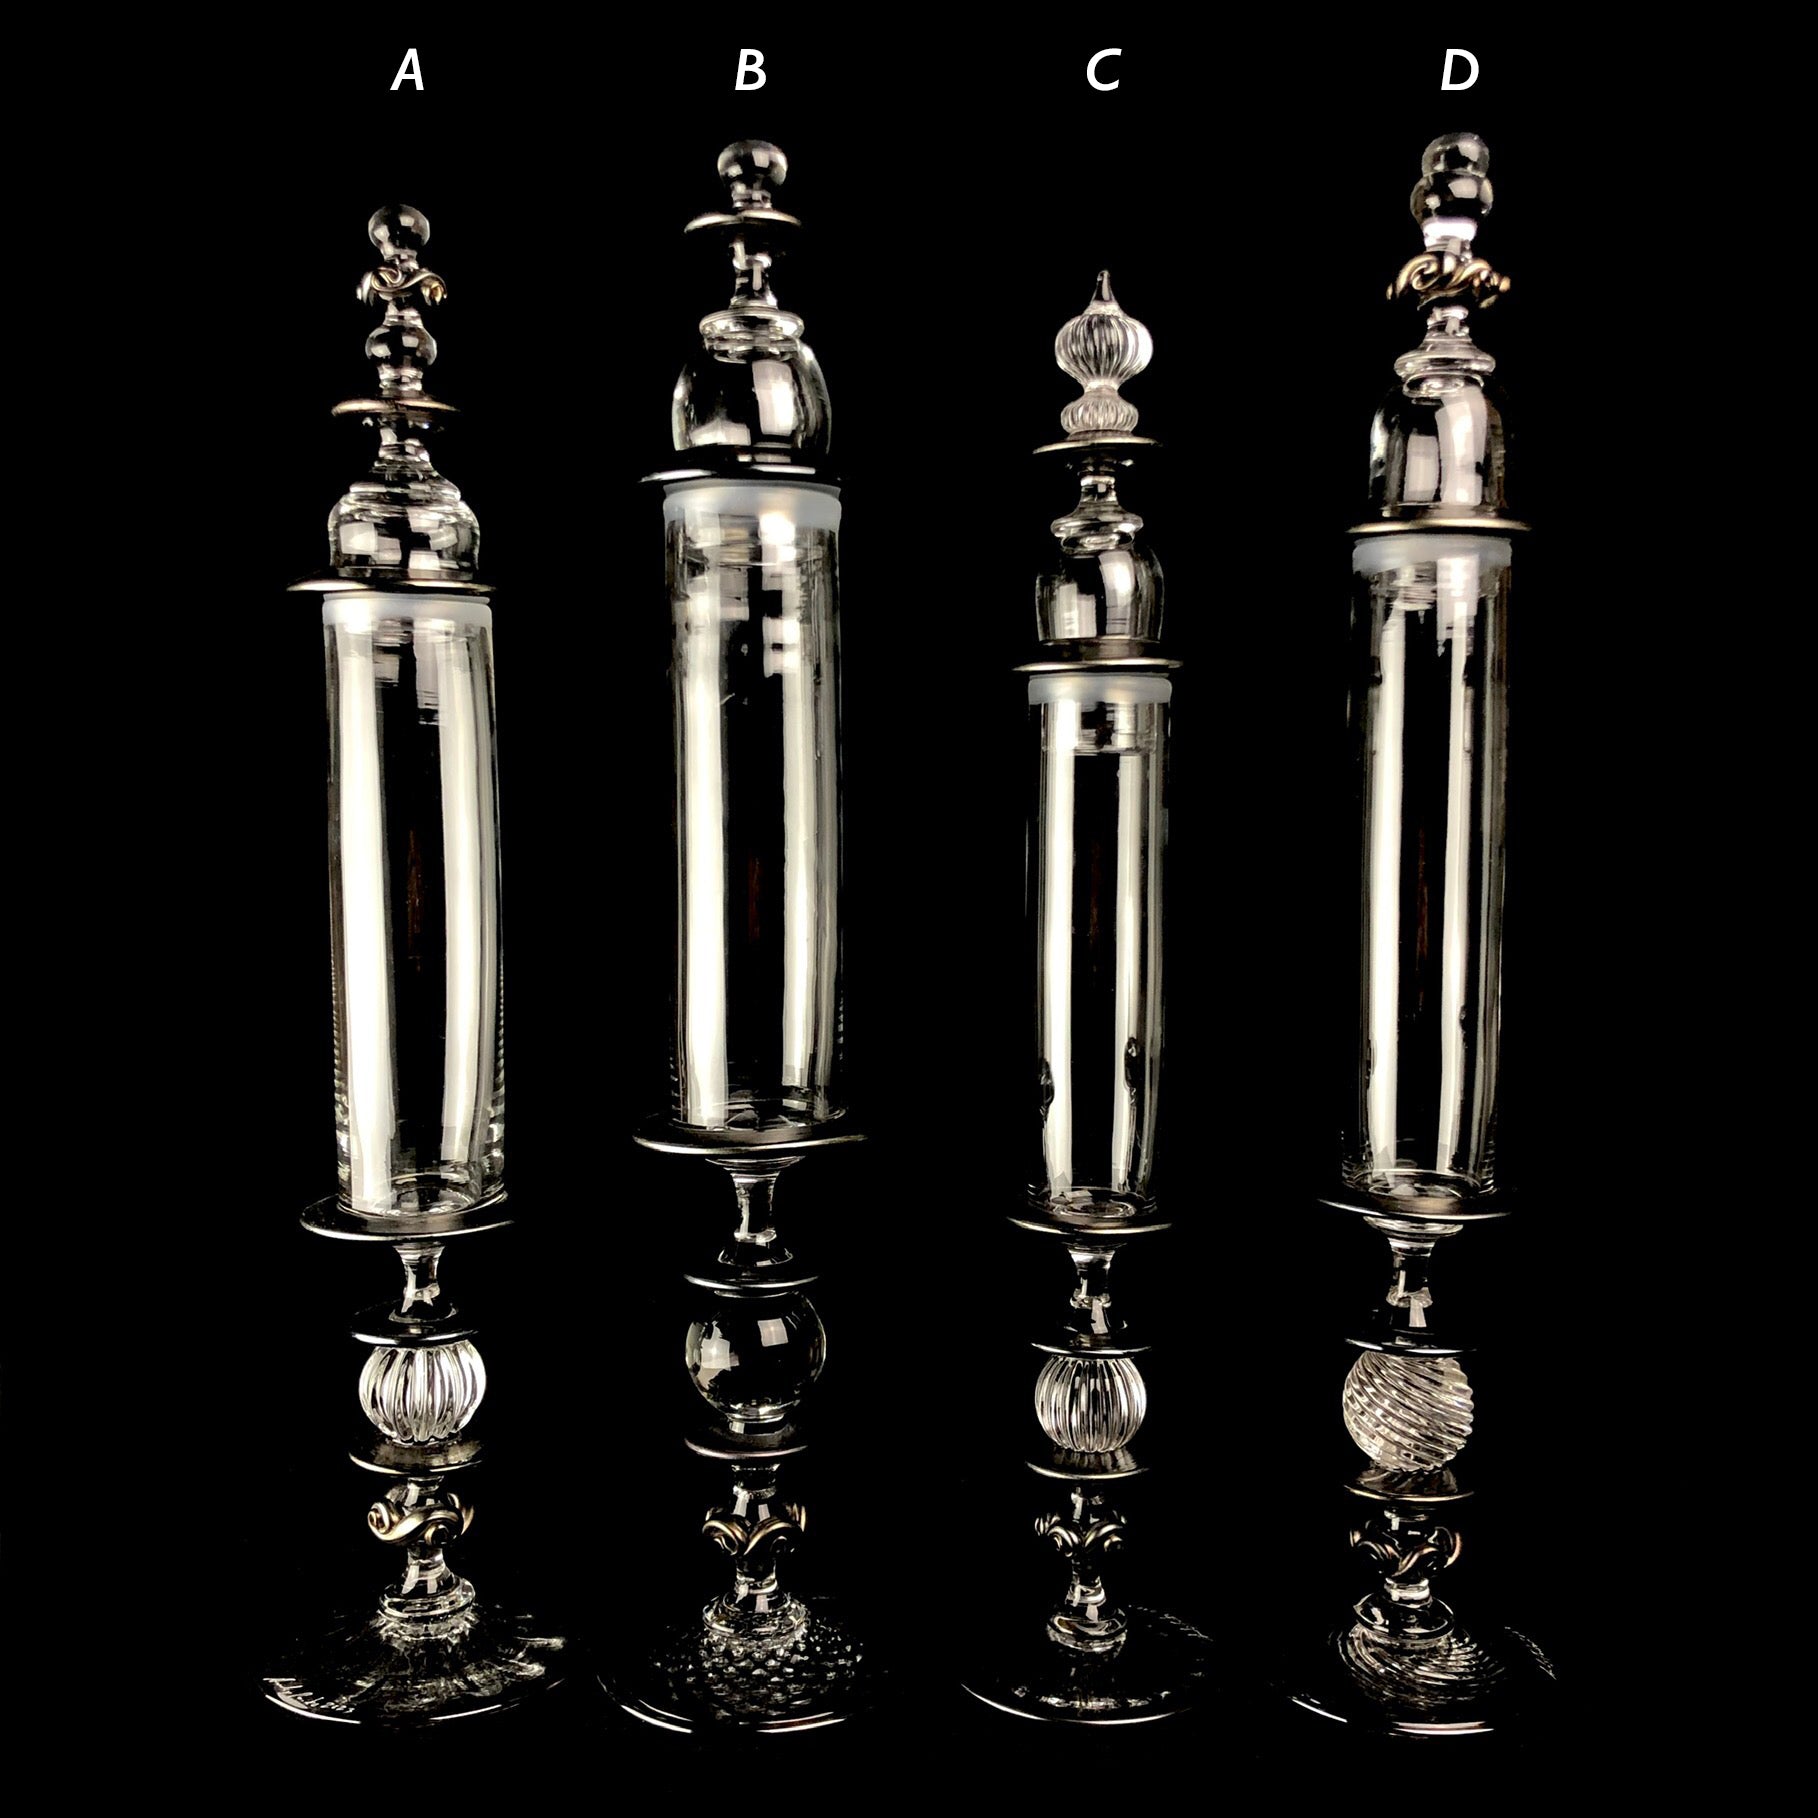 Four clear glass cylindrical containers with fancy lids and stands